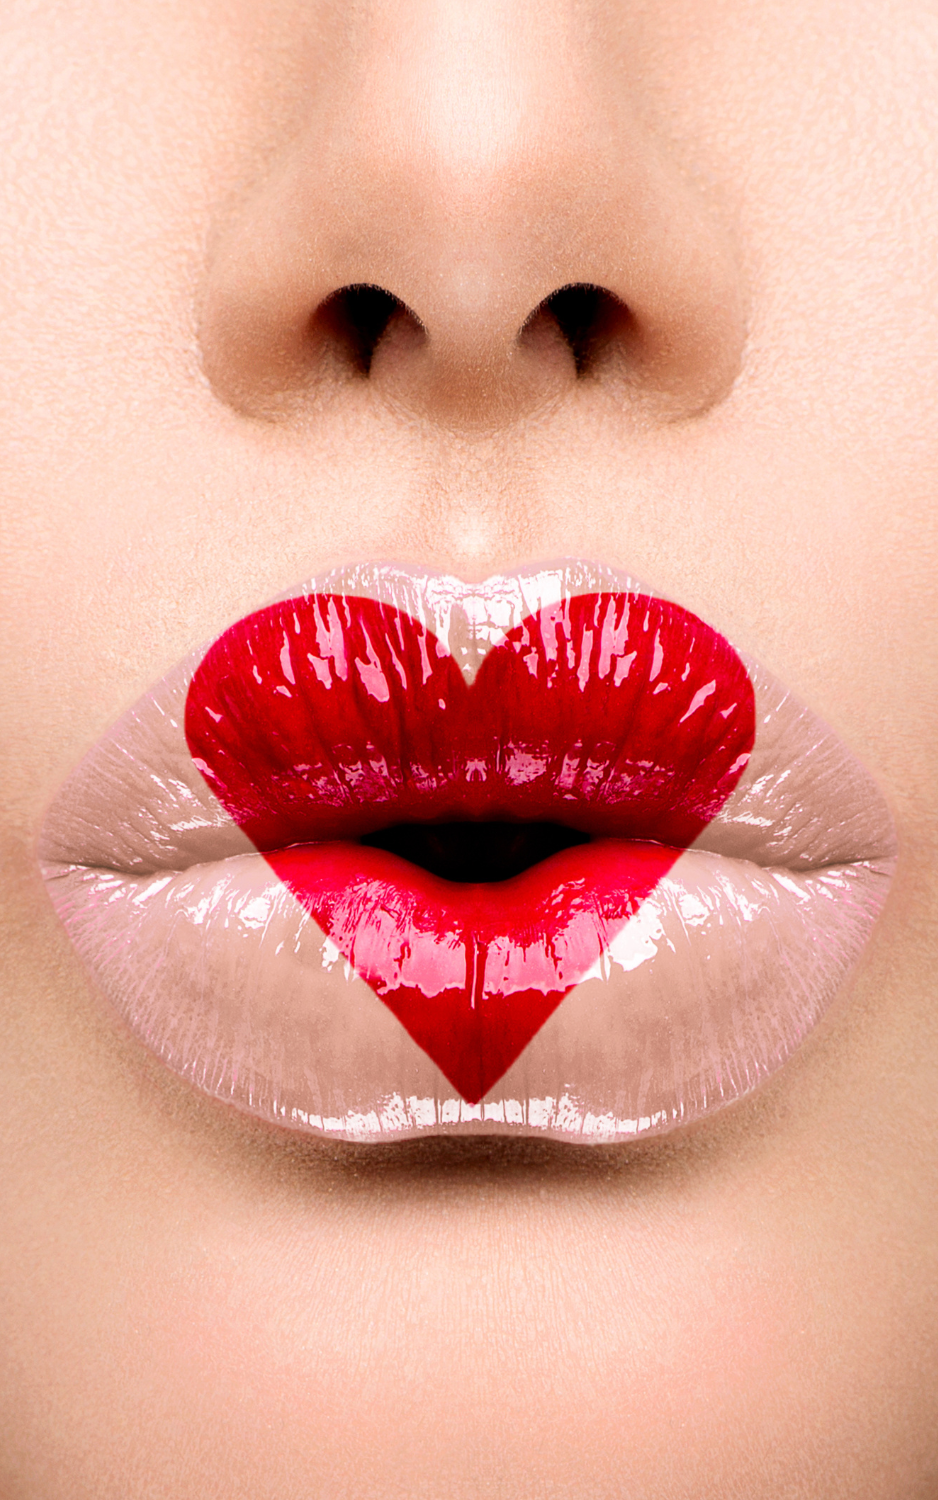 For a Youthful Look, Treat Yourself to Dermal Fillers for Valentine’s Day